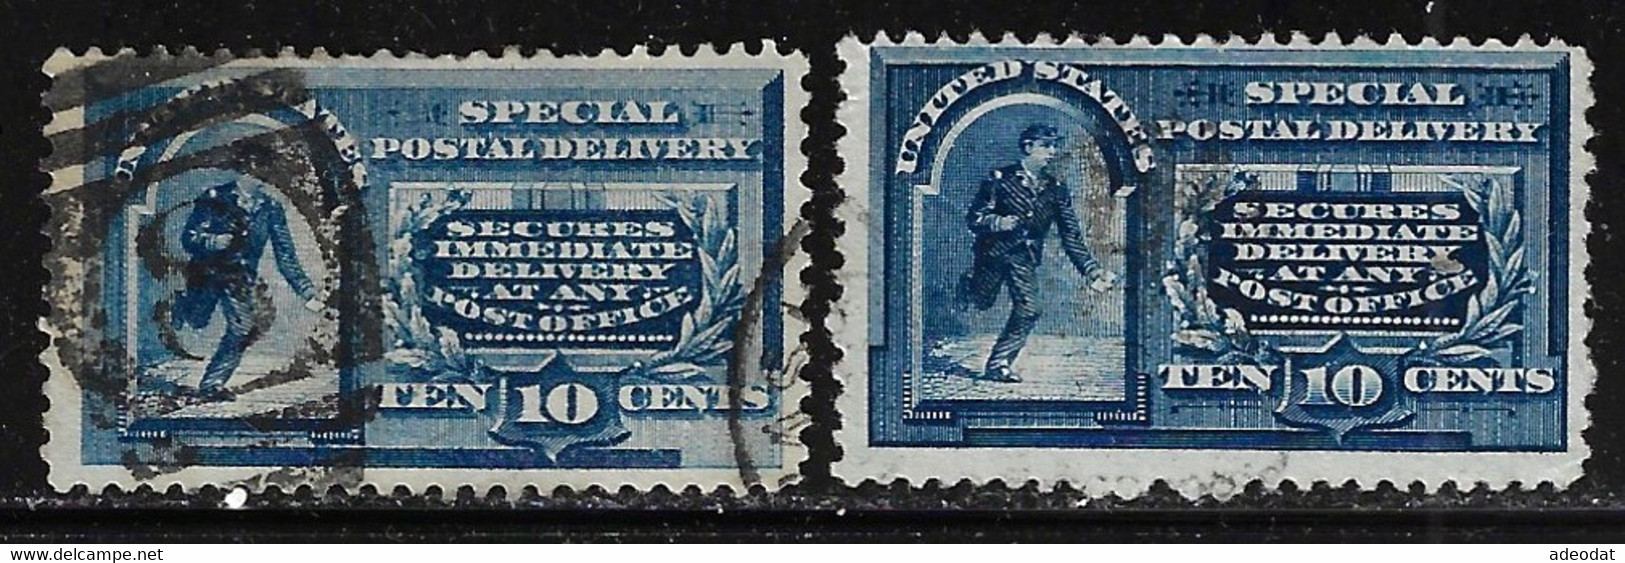 UNITED STATES 1885 SPECIAL DELIVERY SCOTT E1,E4 USED CV US$125. - Expres & Aangetekend